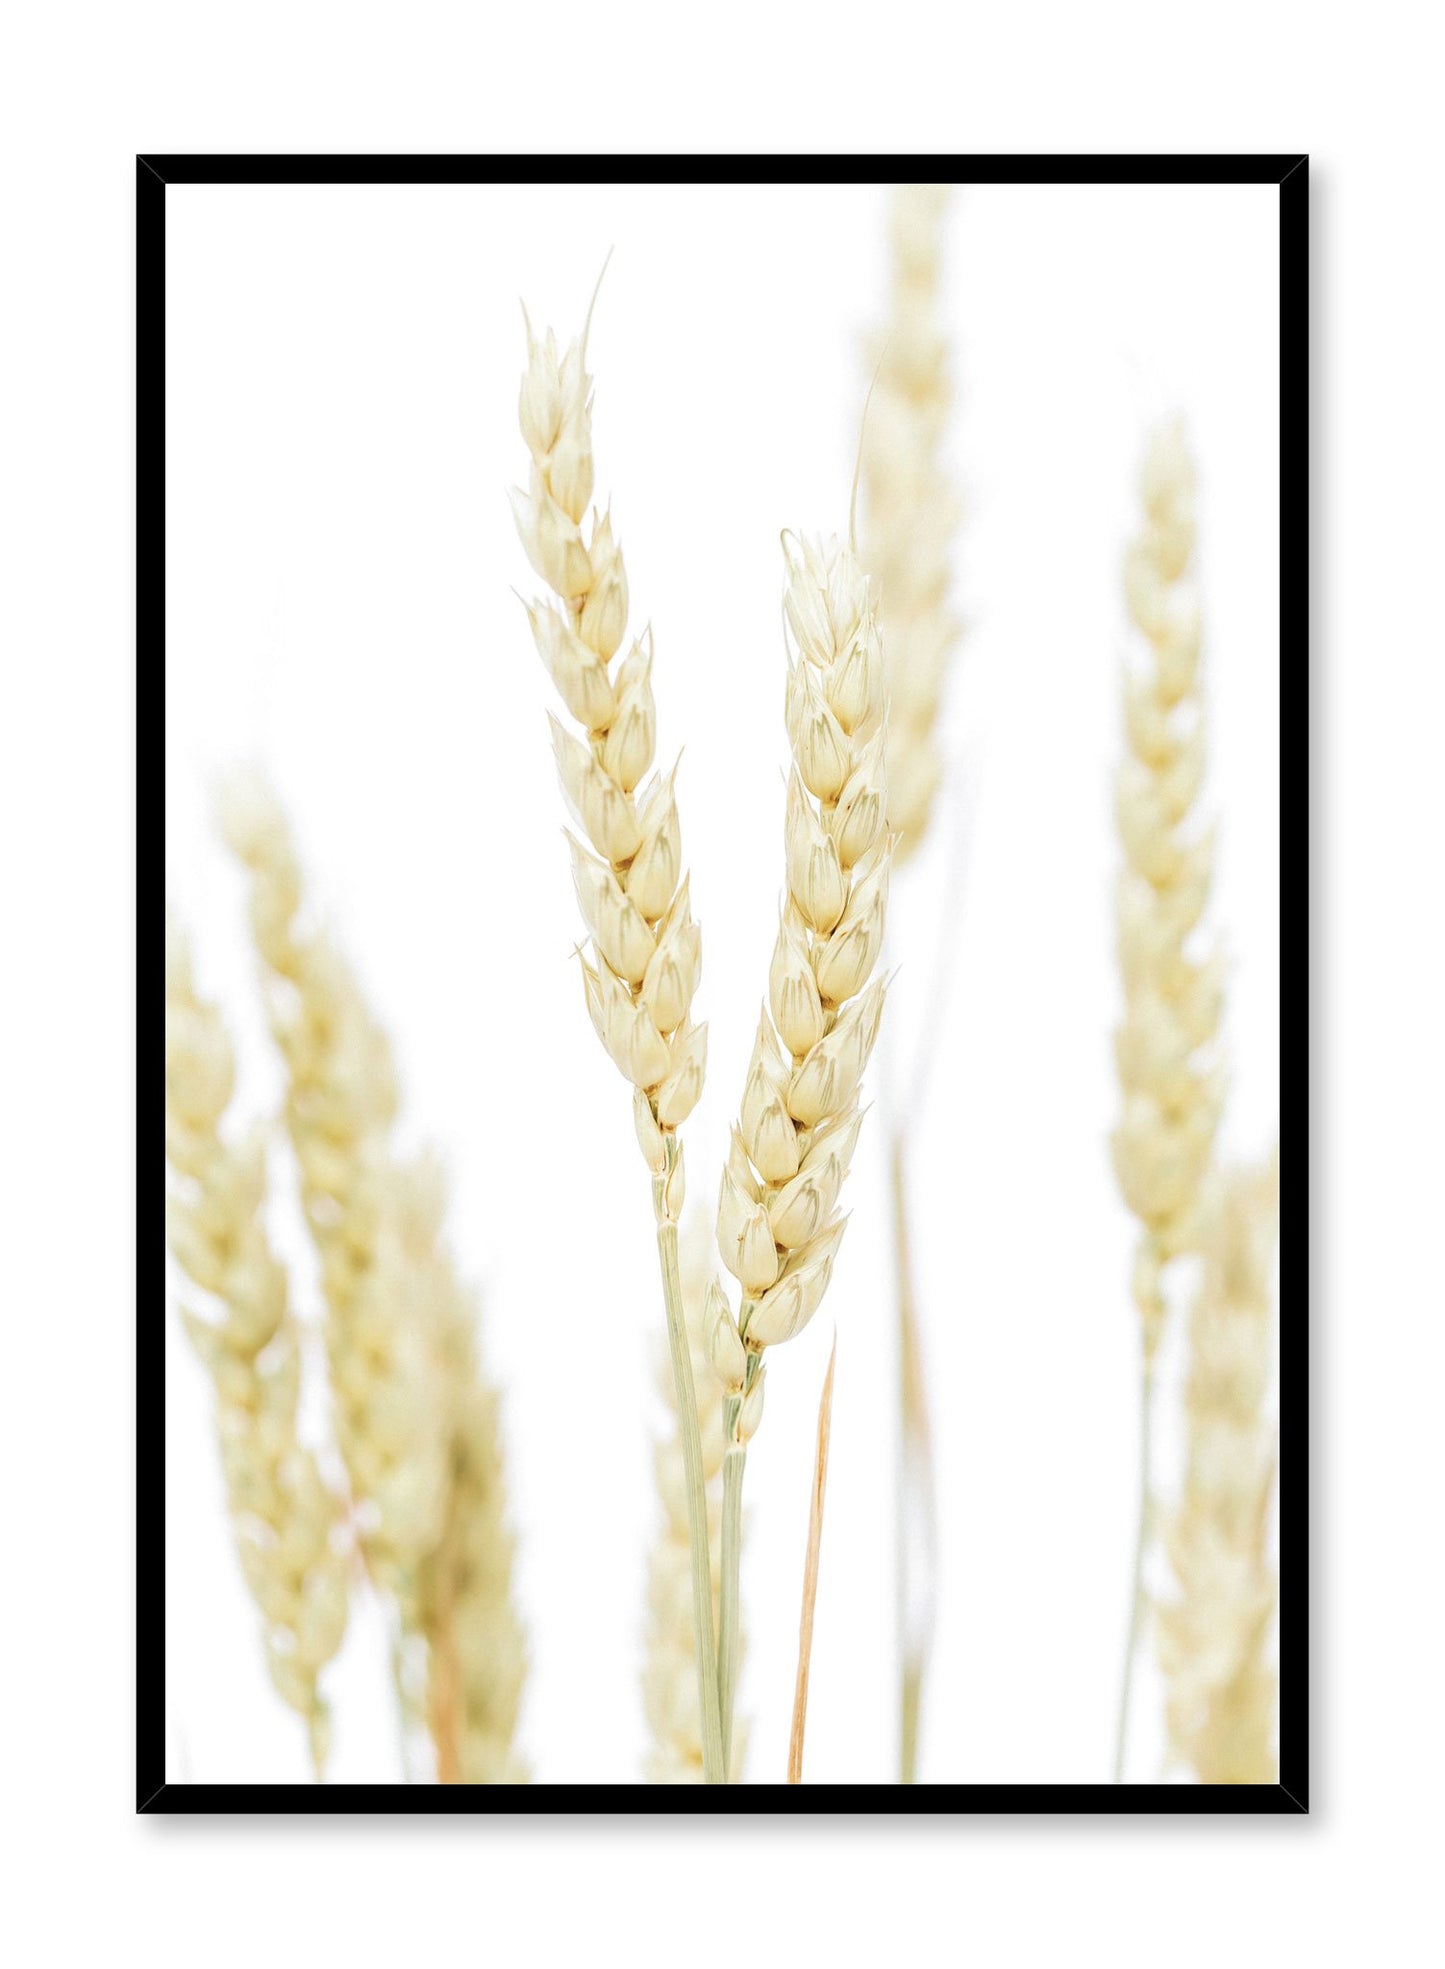 Minimalist wall poster by Opposite Wall with wheat botanical photography